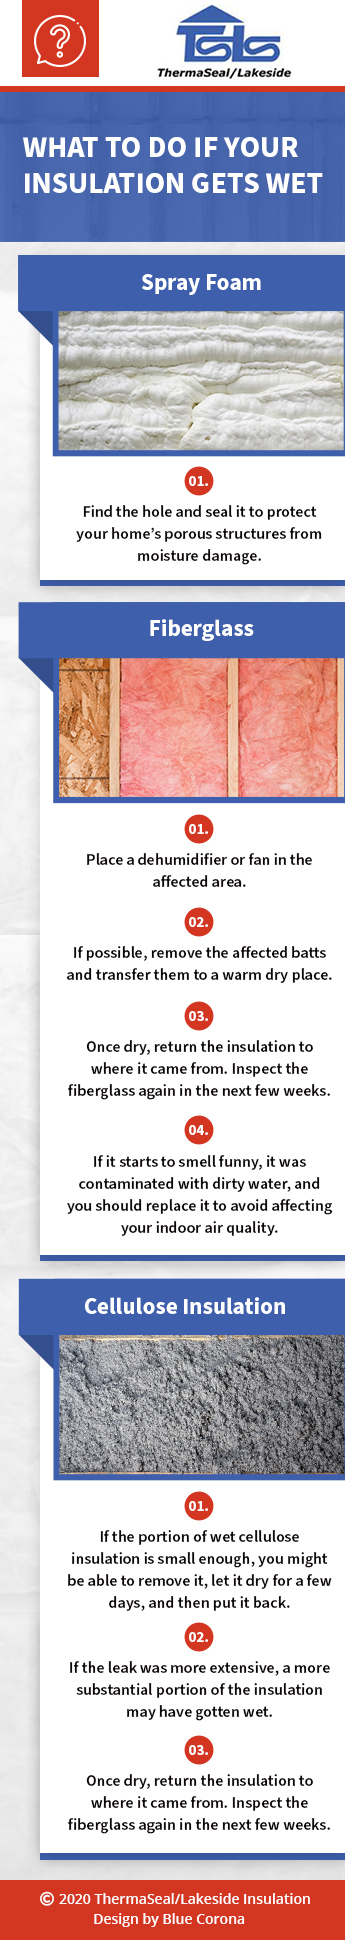 Infographic explaining what to do if your insulation gets wet